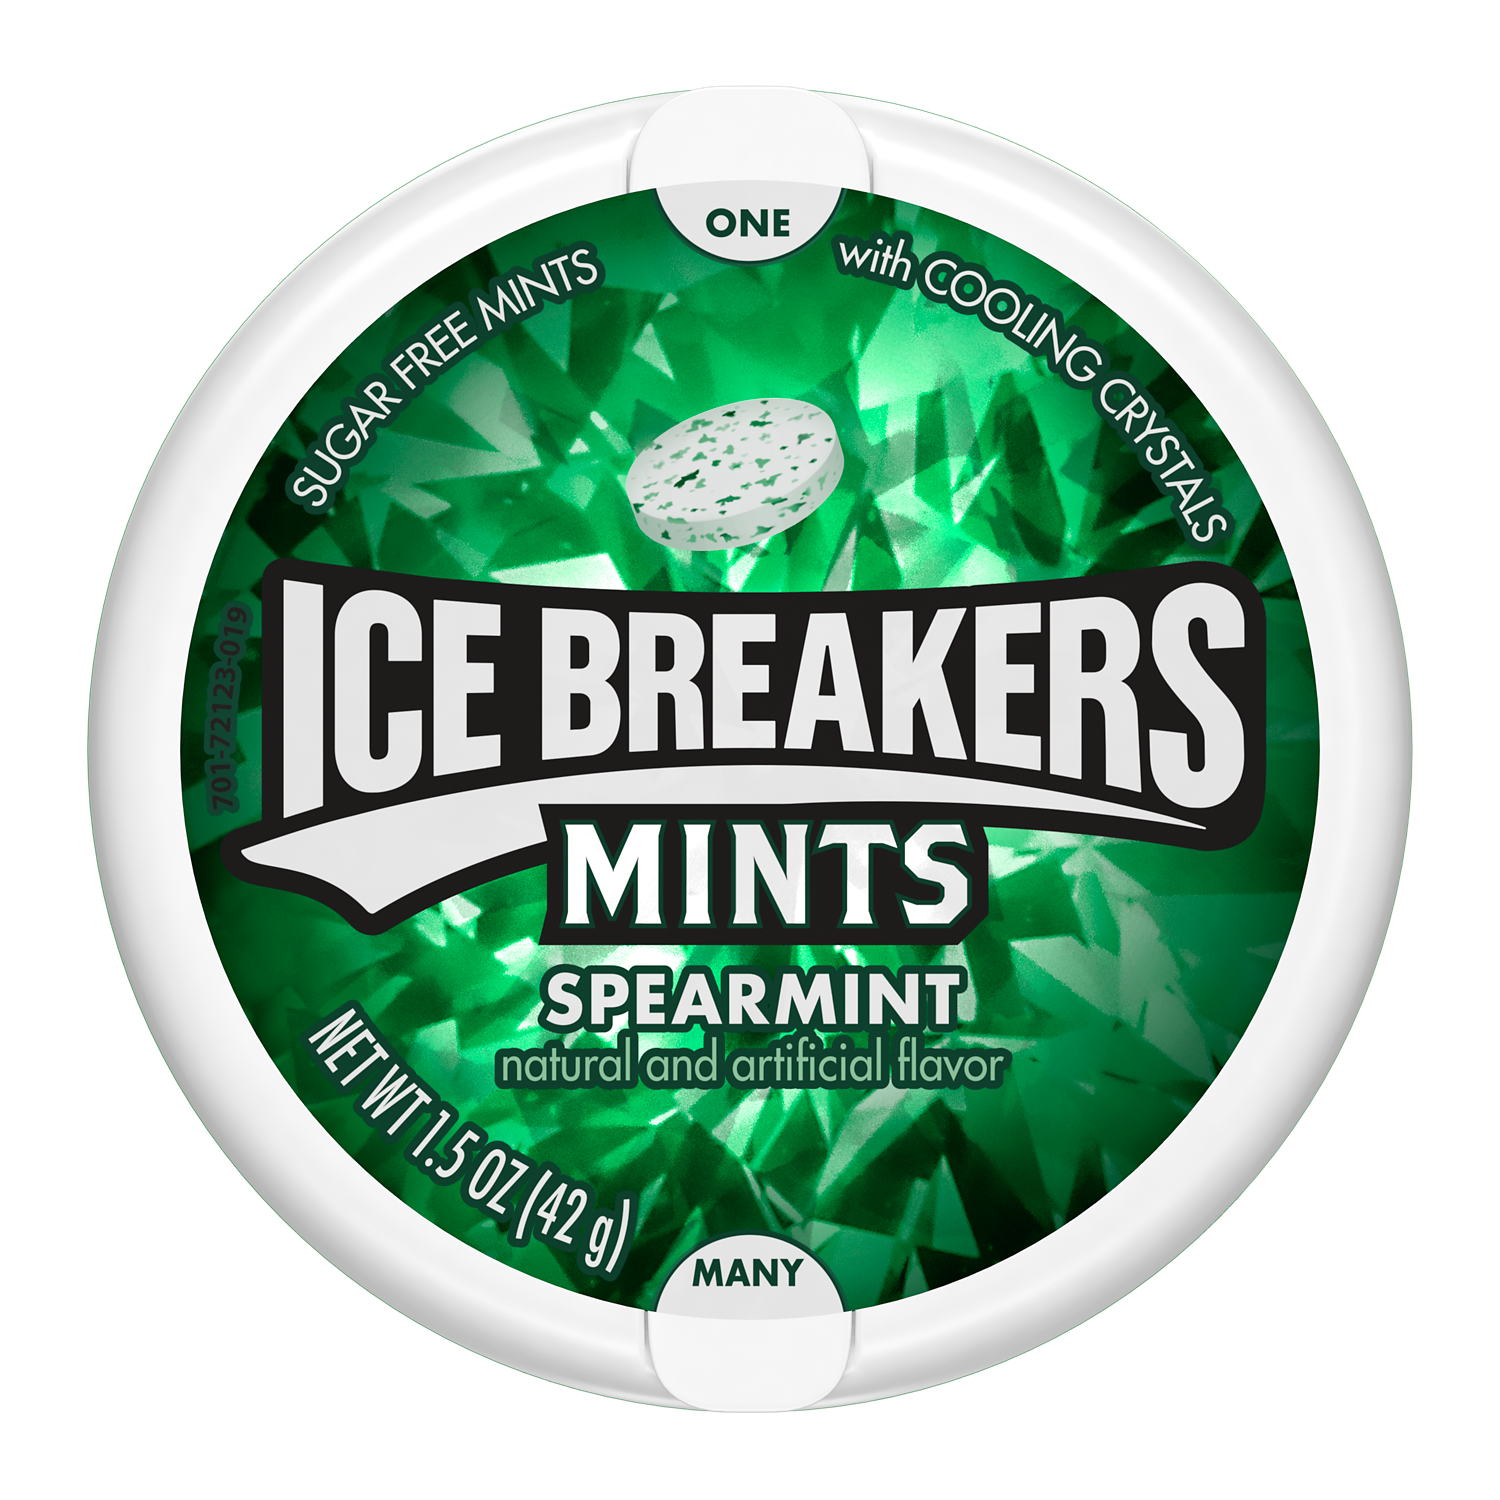 ICE BREAKERS Spearmint Sugar Free Mints, 1.5 oz puck - Front of Package